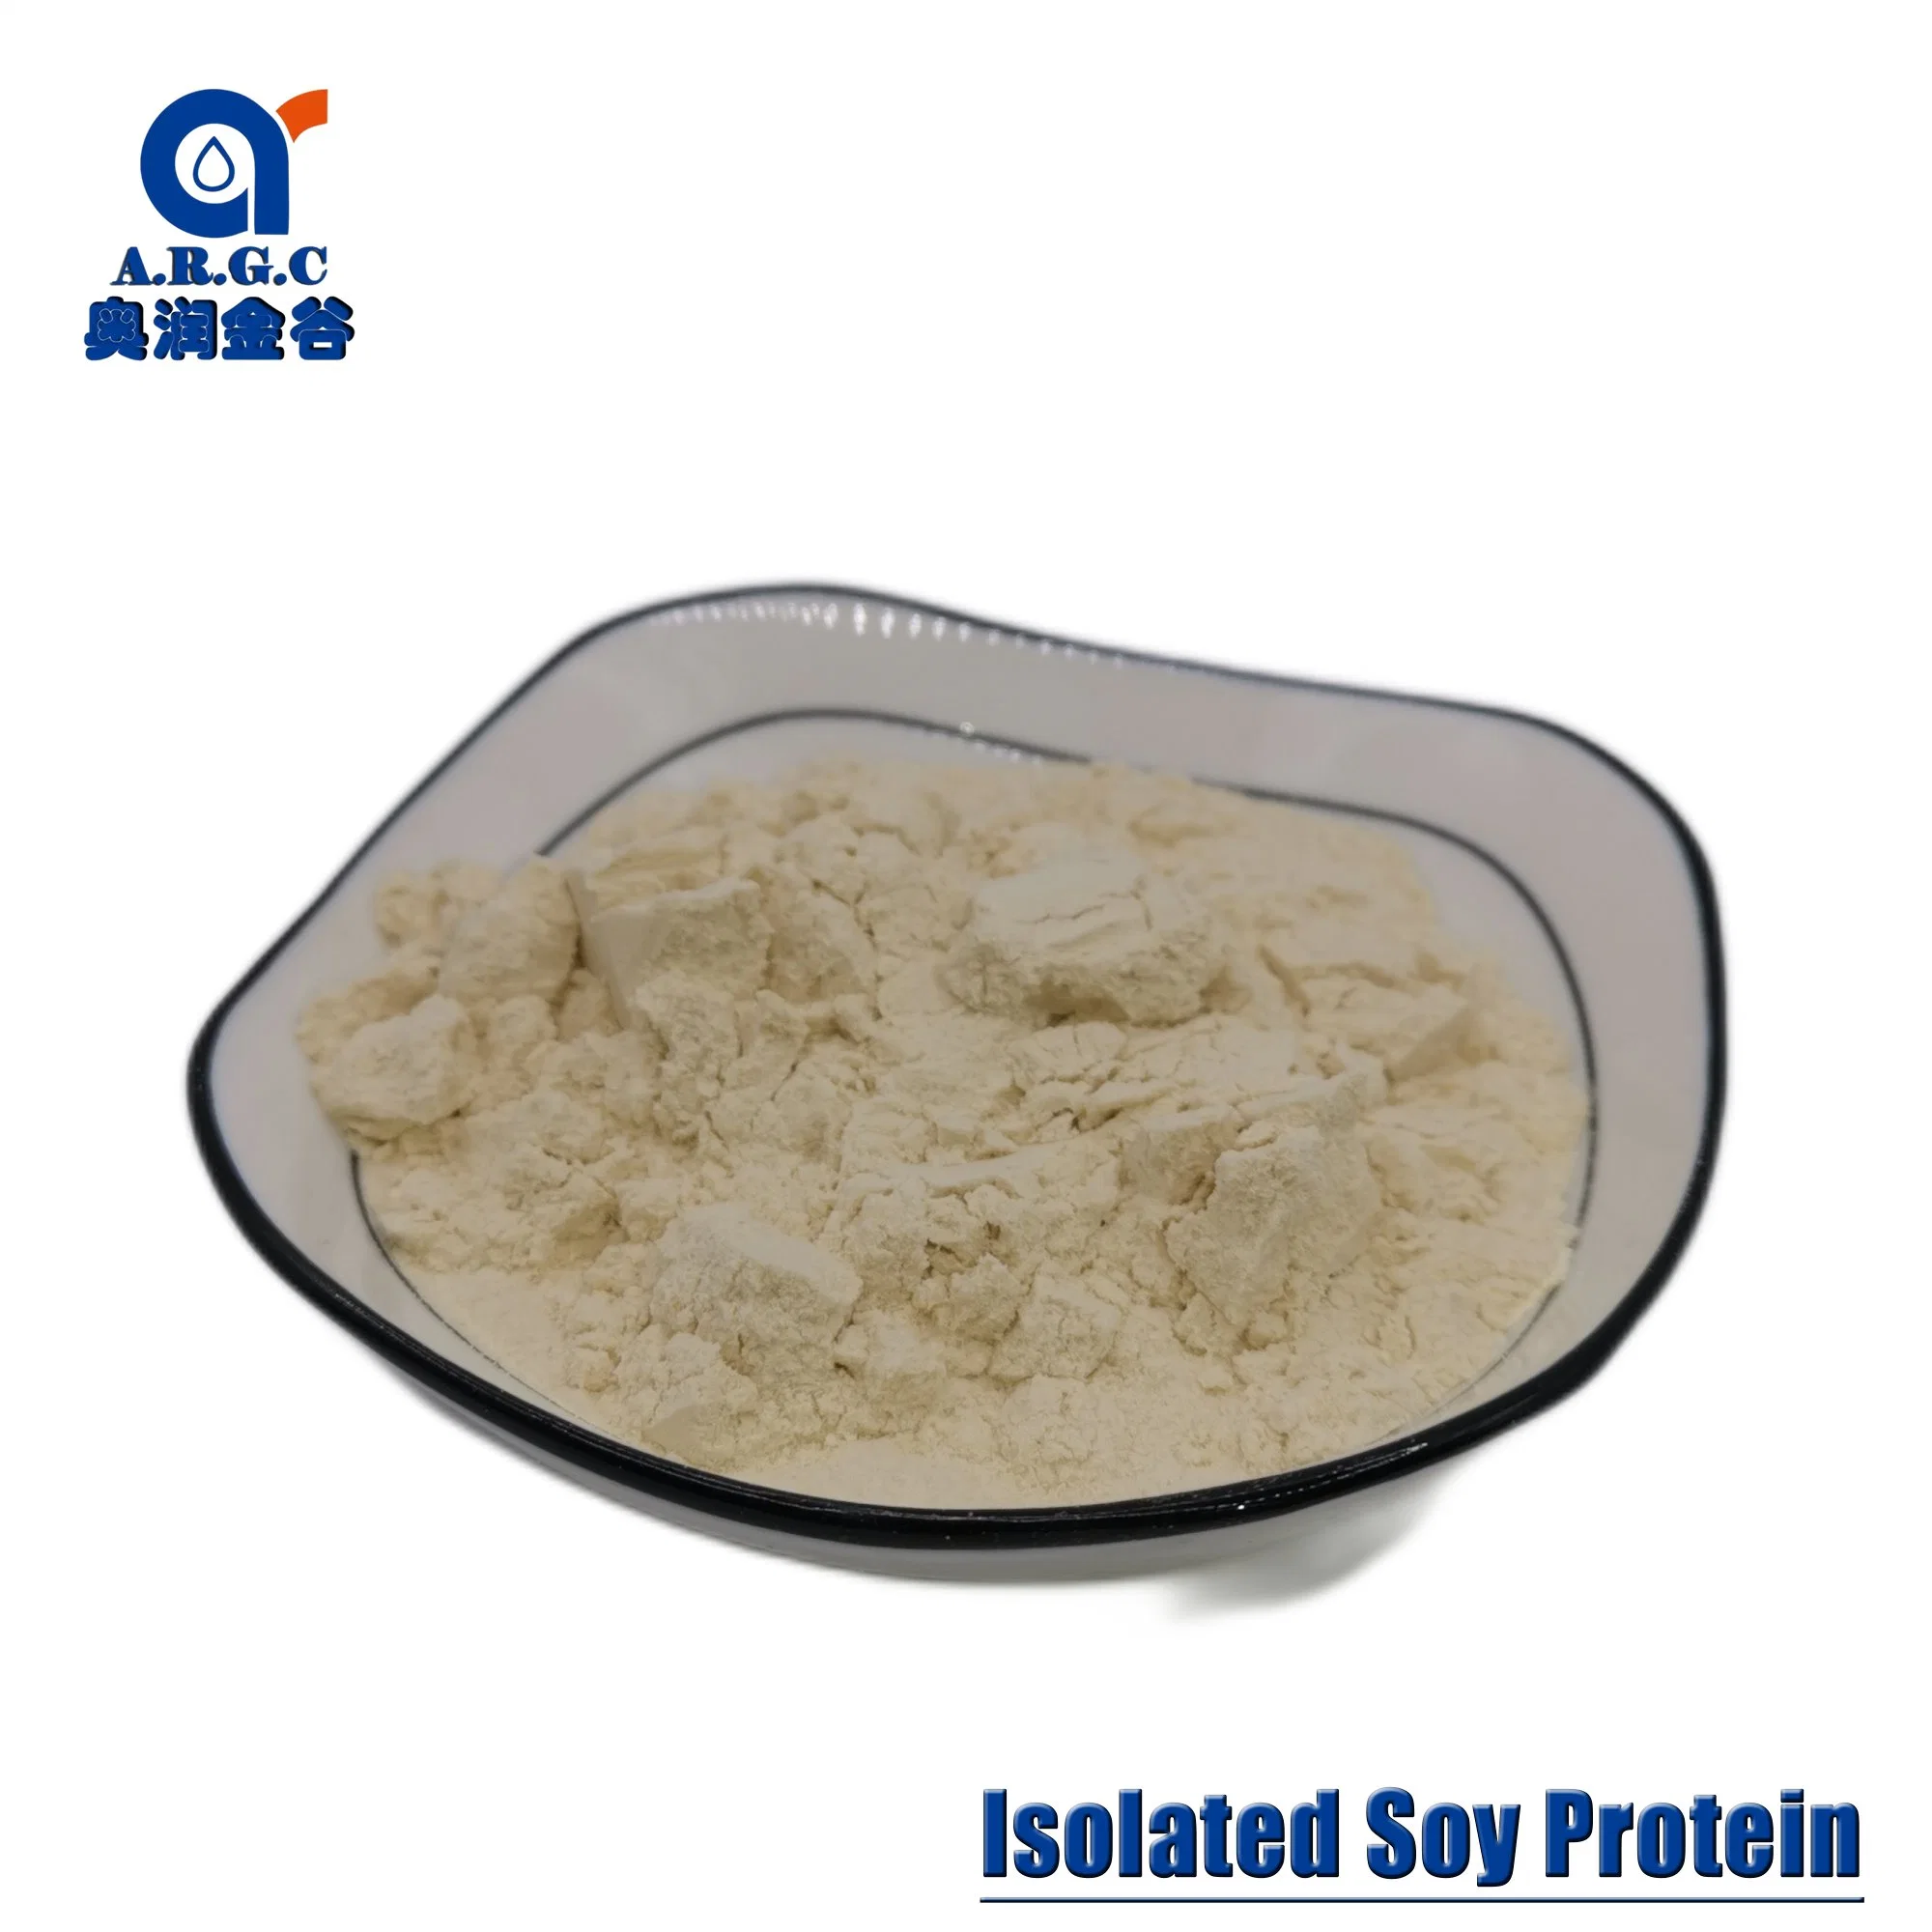 Argc Non-GMO Food Additives 90% Soy Protein Isolate Powder for Meat Processing